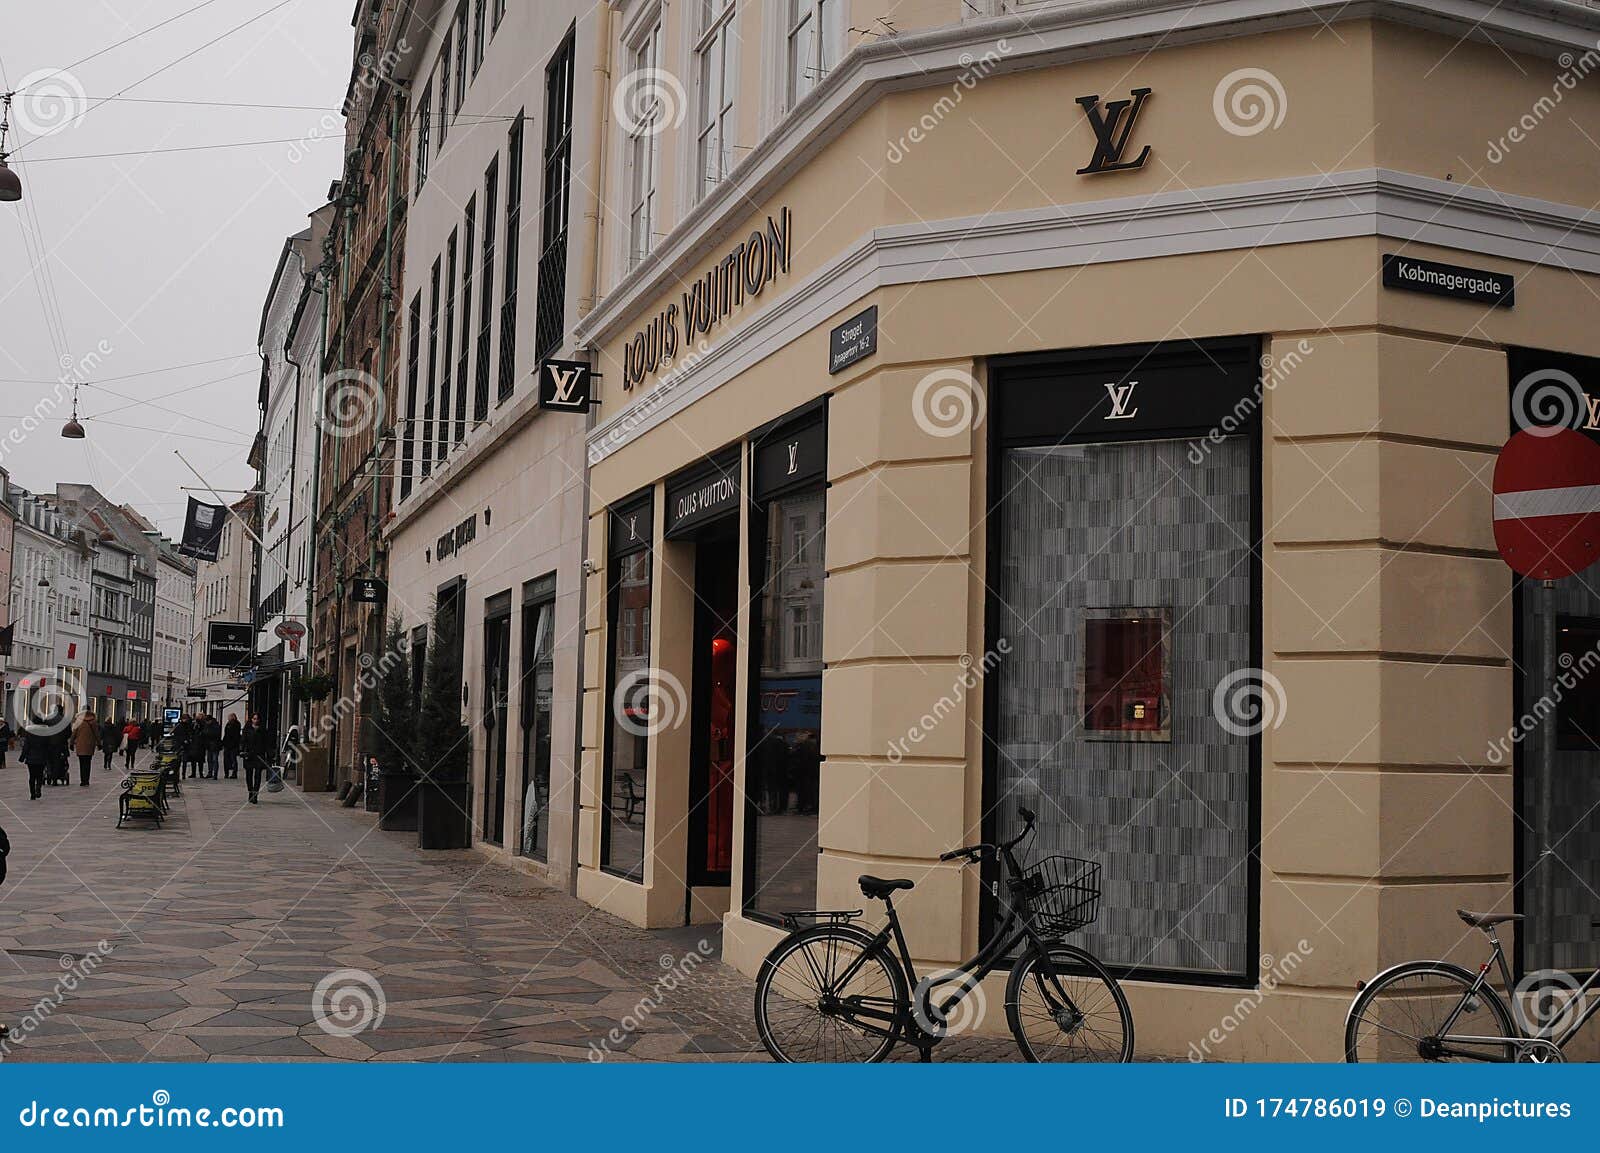 Exterior Louis Vuitton Store On Stroget Editorial Stock Photo - Stock Image